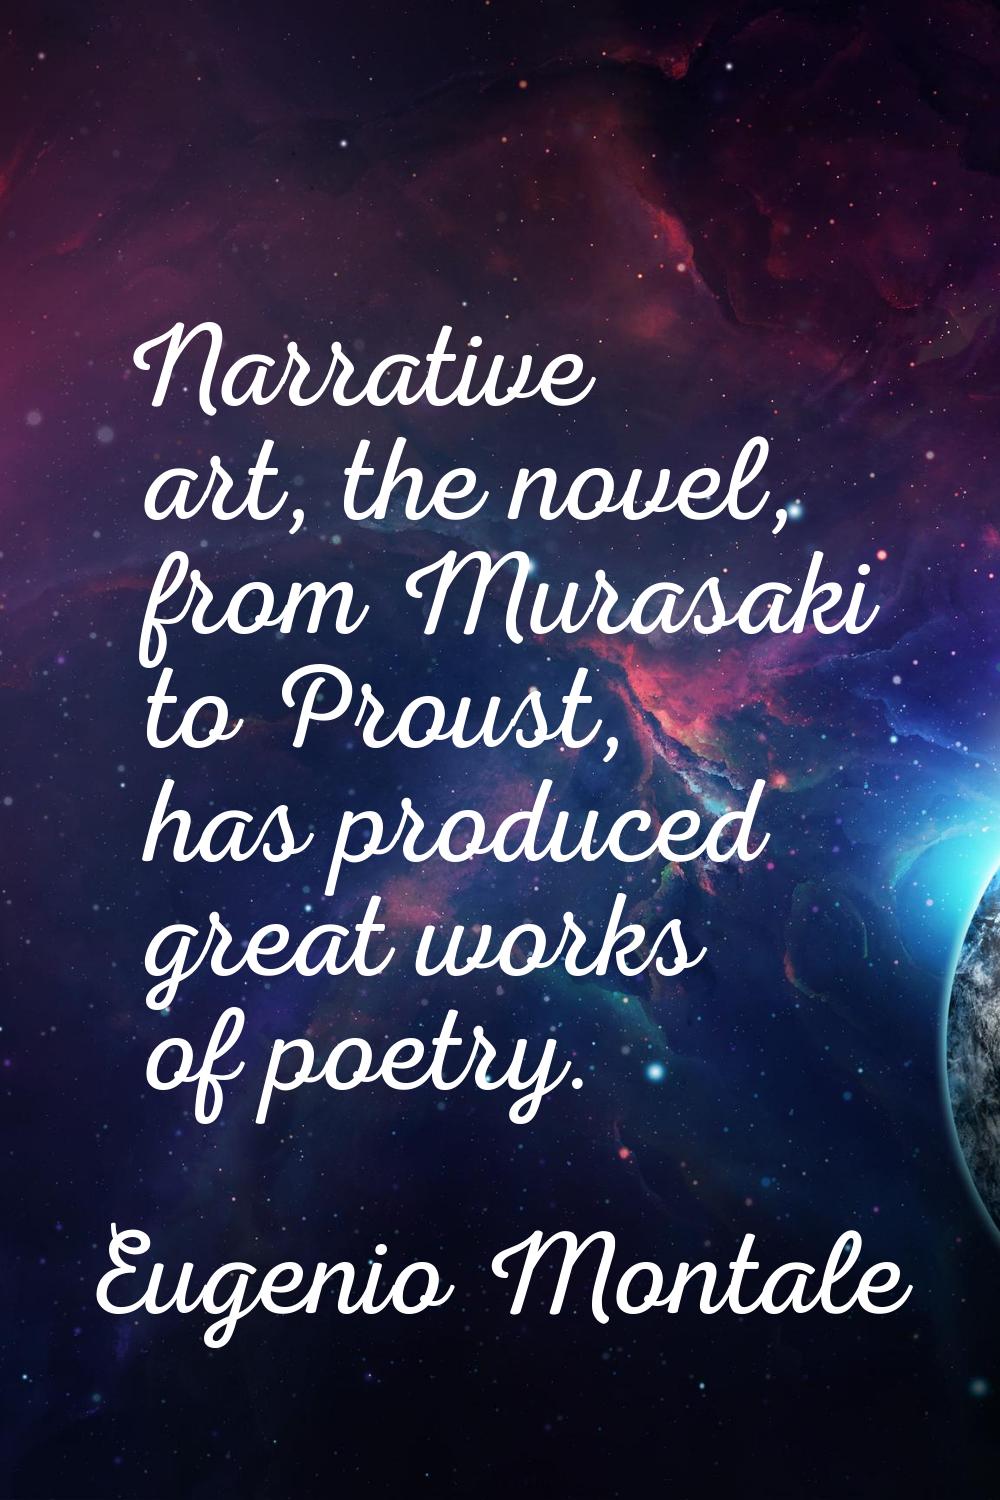 Narrative art, the novel, from Murasaki to Proust, has produced great works of poetry.